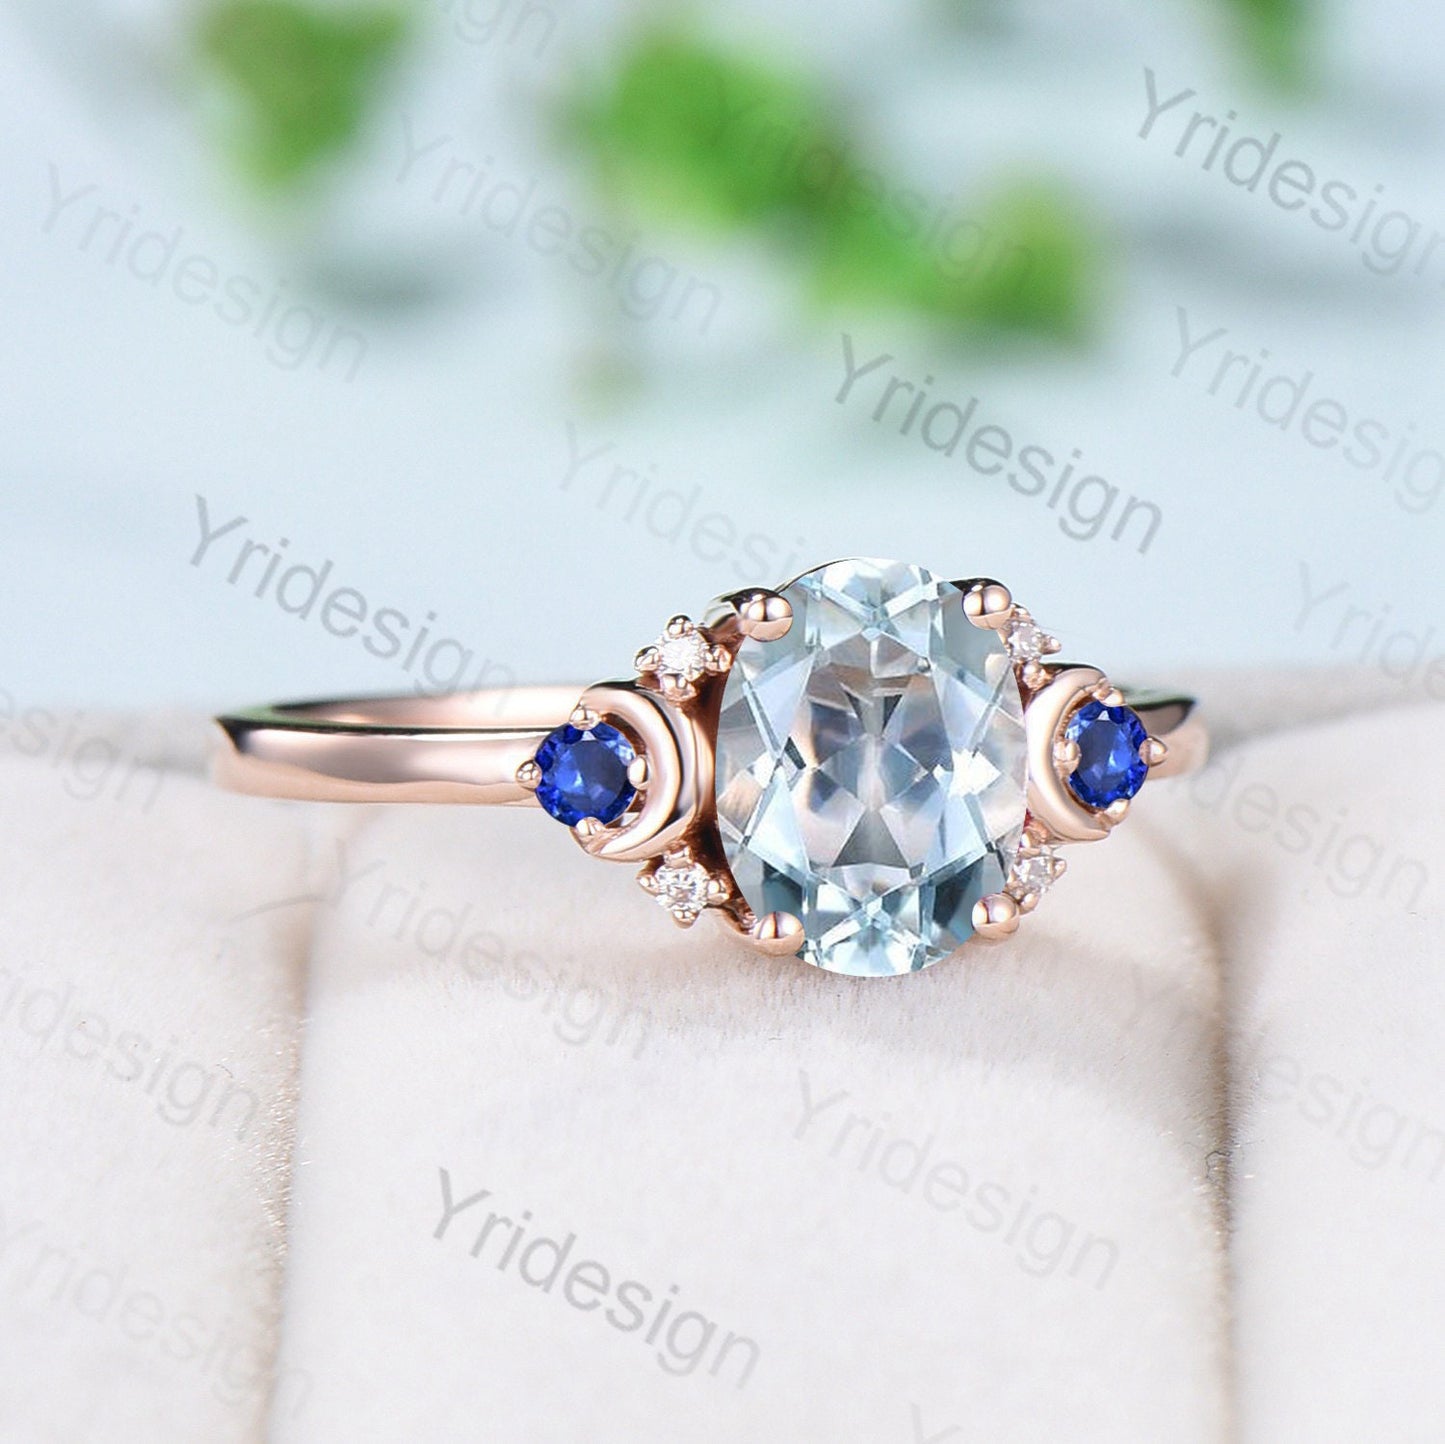 Vintage Aquamarine Engagement Ring Unique Nature Inspired Moon Cluster Sapphire Wedding Ring Unique Gold Alternative Promise Ring For Women - PENFINE